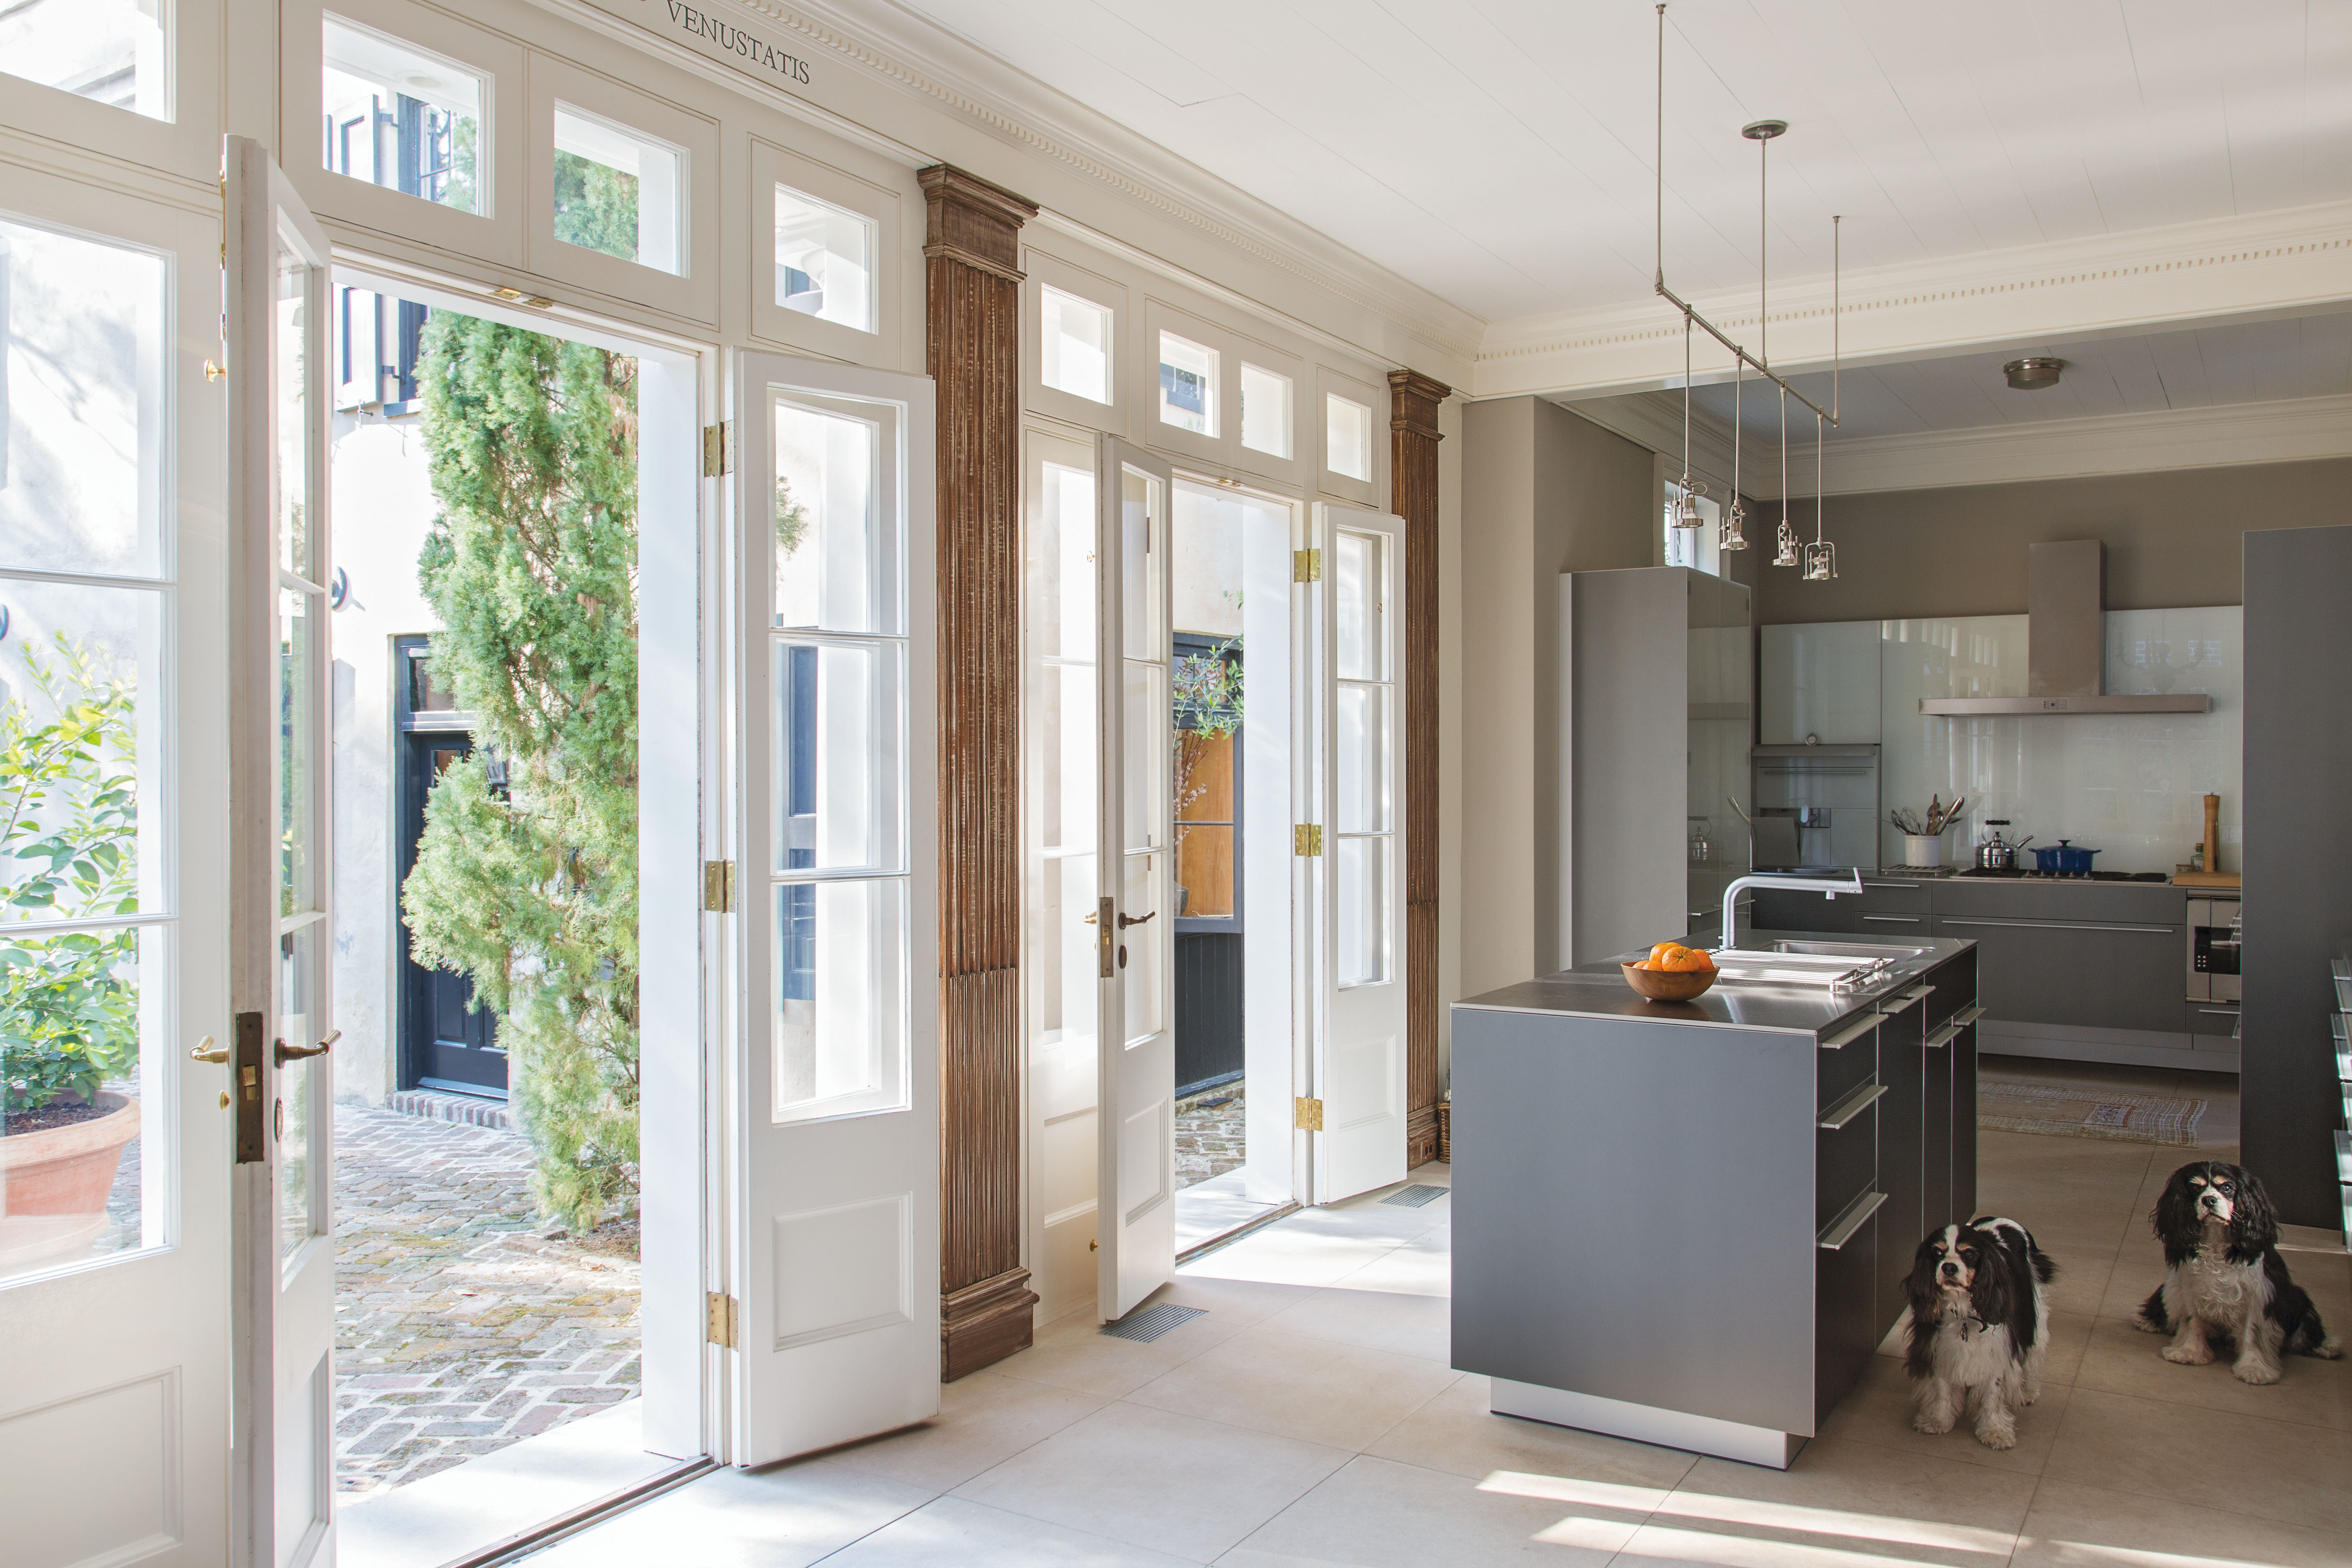 Sleek Bulthaup cabinetry commingles with antiqued pilasters in the kitchen, located within the former rear porch.